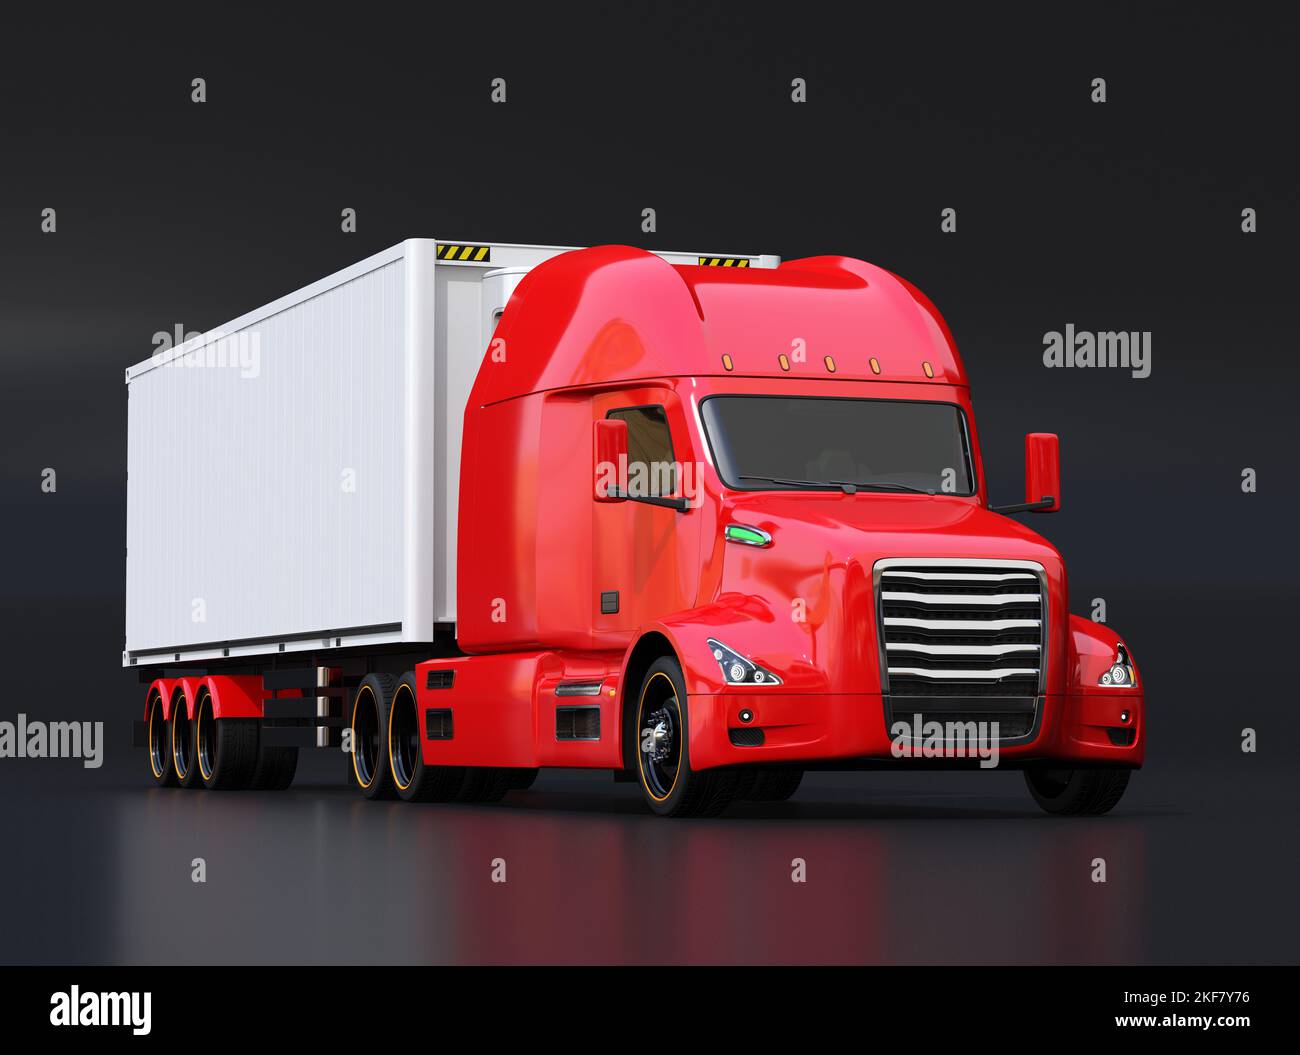 Front view of red fuel cell truck equipped with reefer container on black background. Cold chain concept. 3D rendering image. Stock Photo